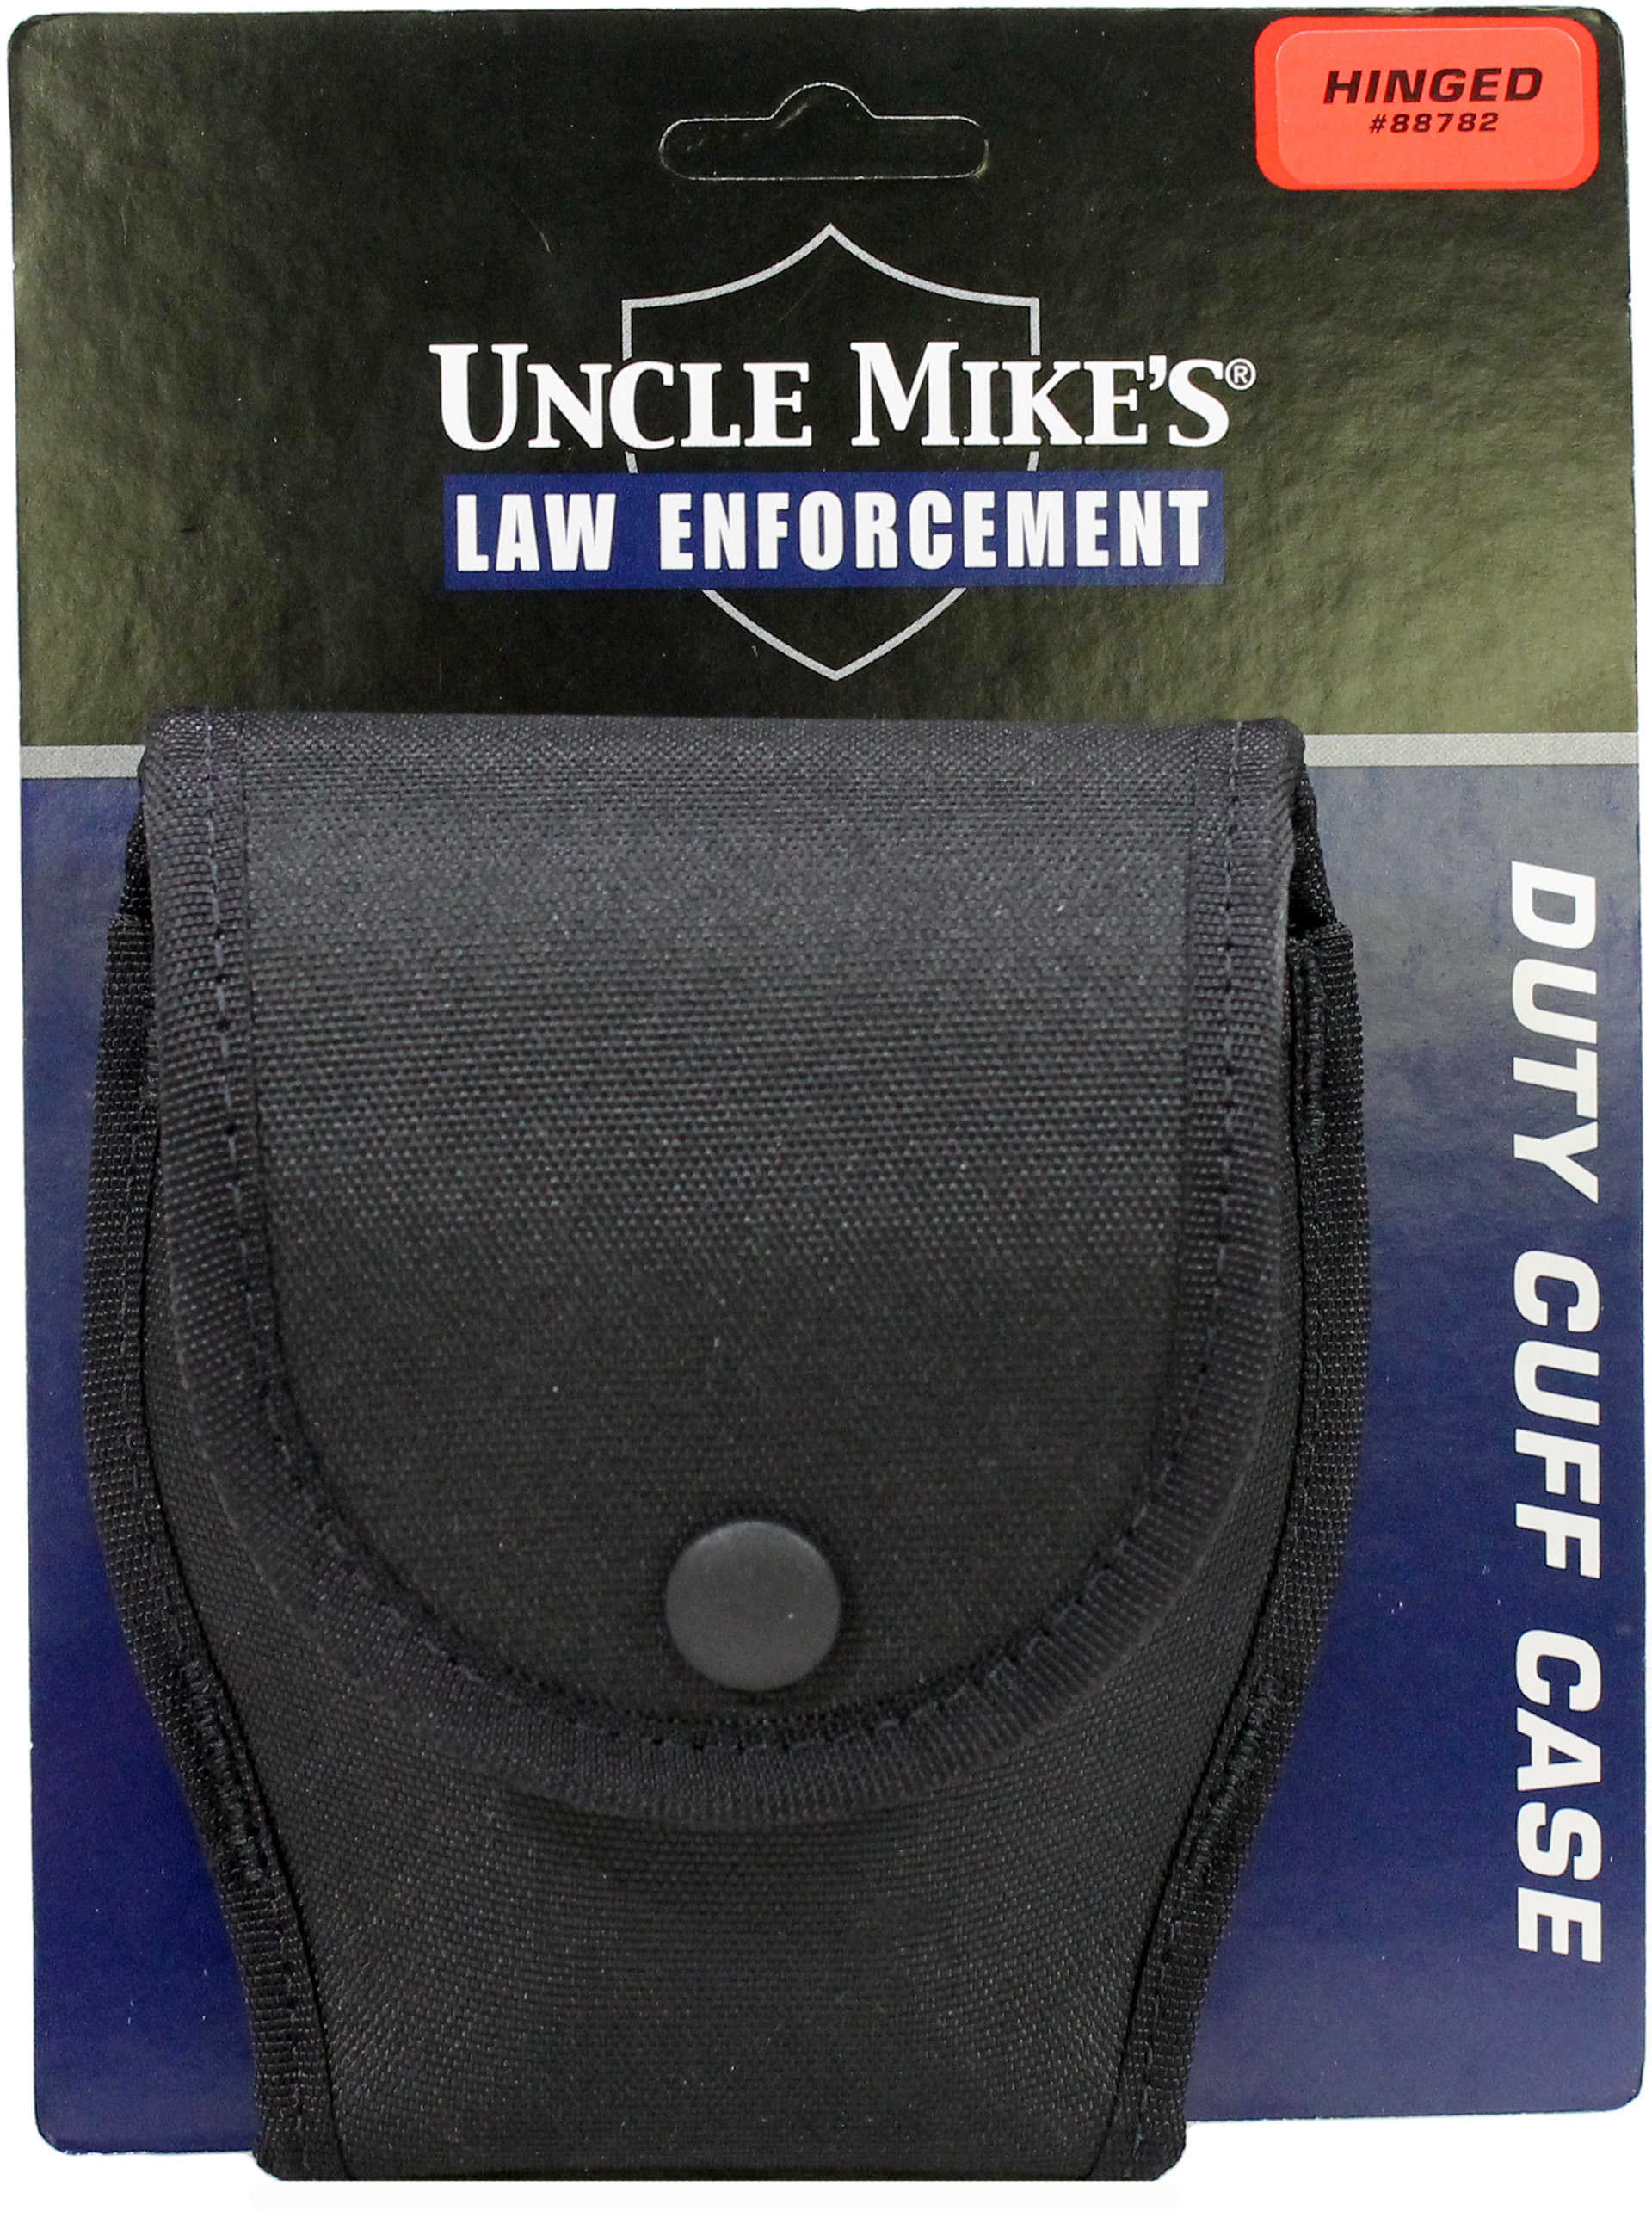 Uncle Mikes Duty Cuff Case Single Hinged with Flap Kodra Black Md: 88782